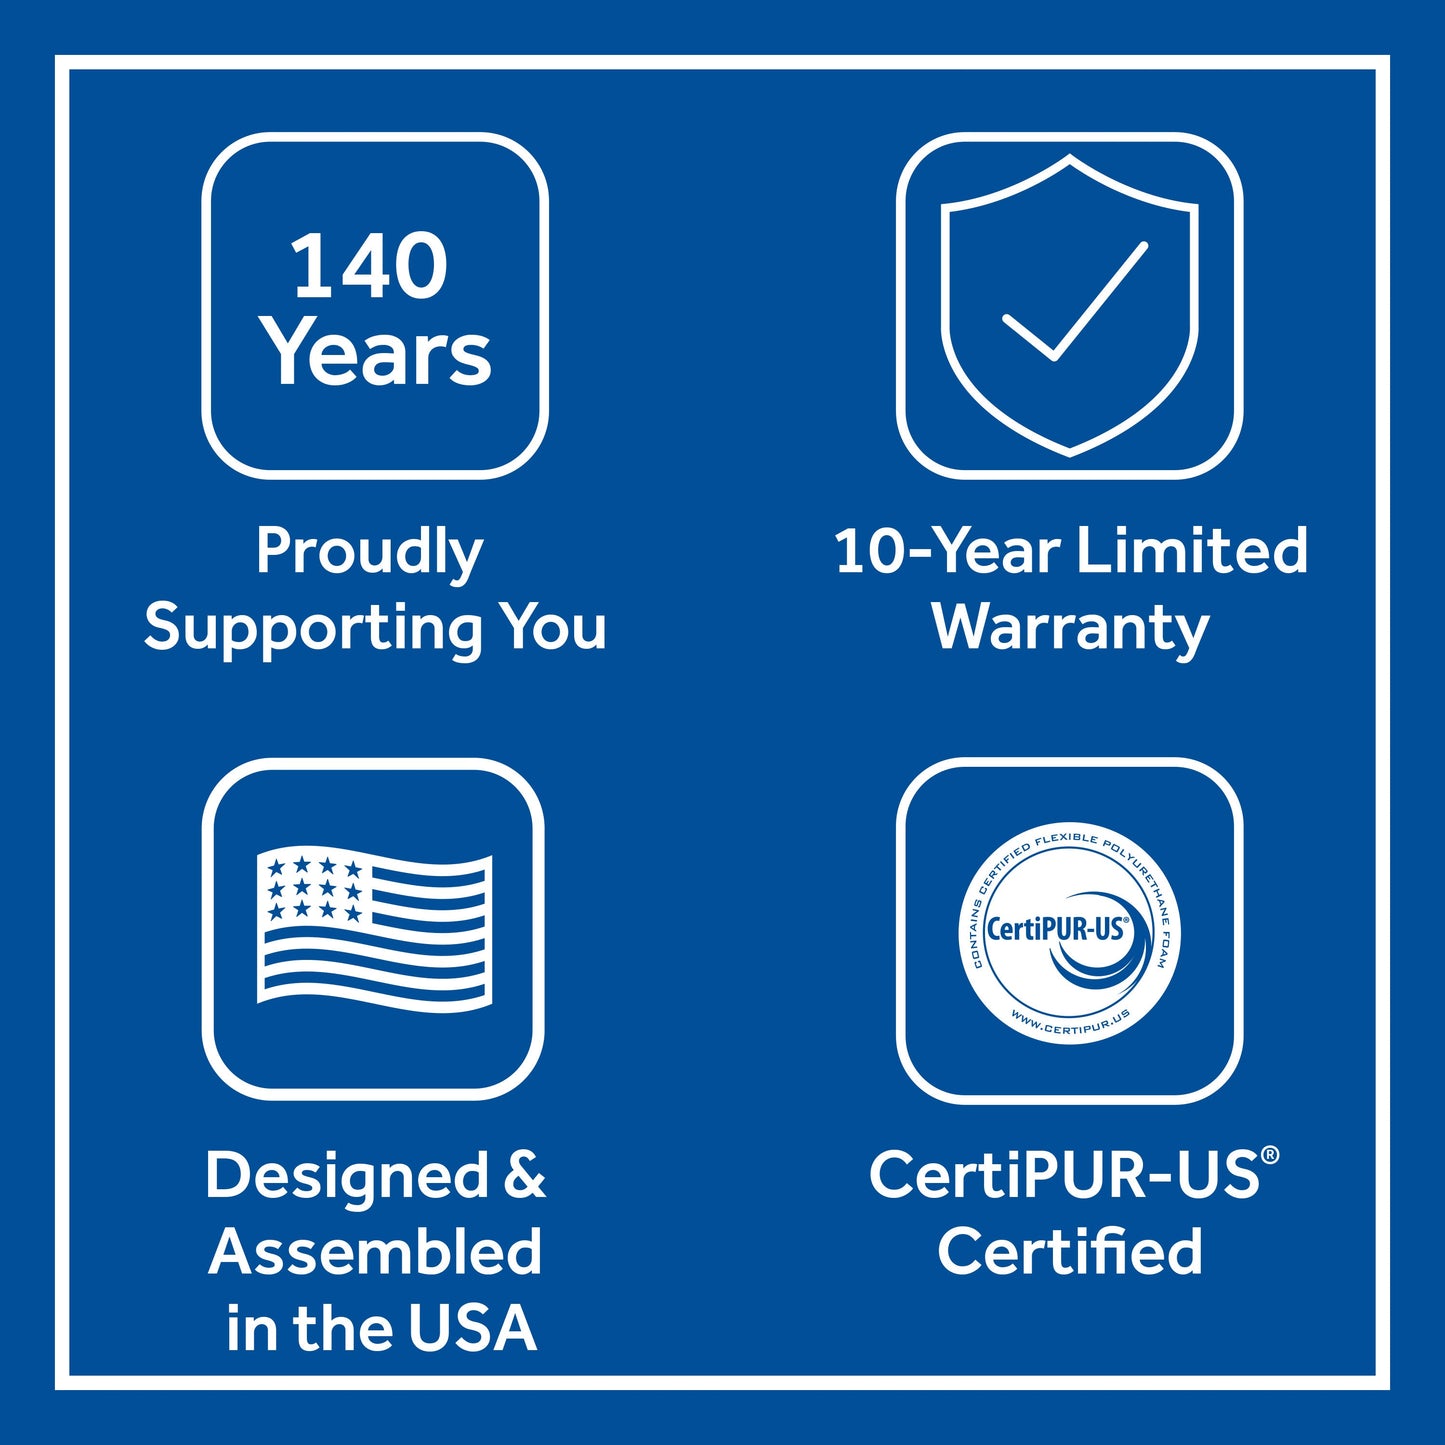 Sealy High Point Ultra Soft Mattress Features; Proudly supporting you, 10 year limited warranty, designed and assembled in the USA, CertiPUR-US Certified